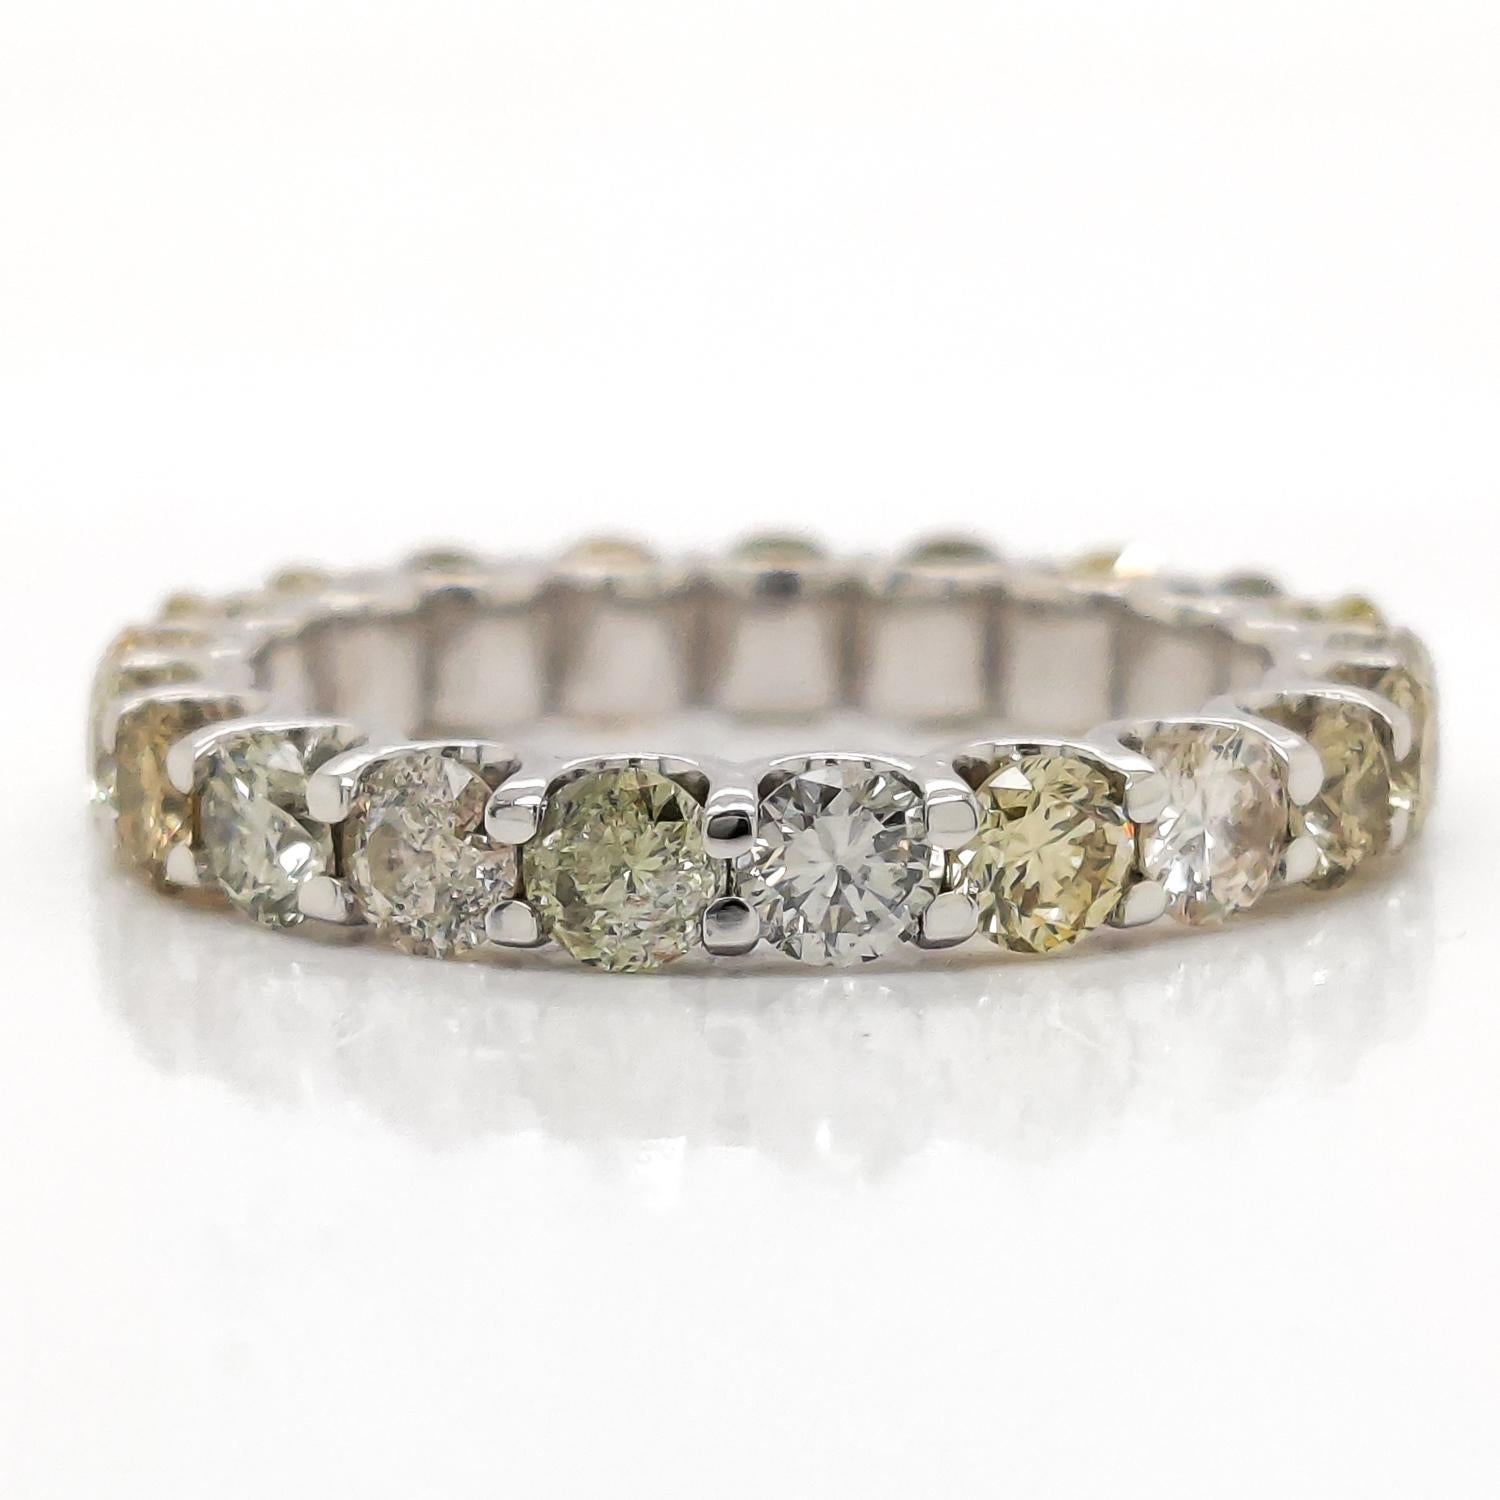 Contemporary ***No Reserve Price*** 2.80ct Natural Fancy Colors Diamond Eternity Ring